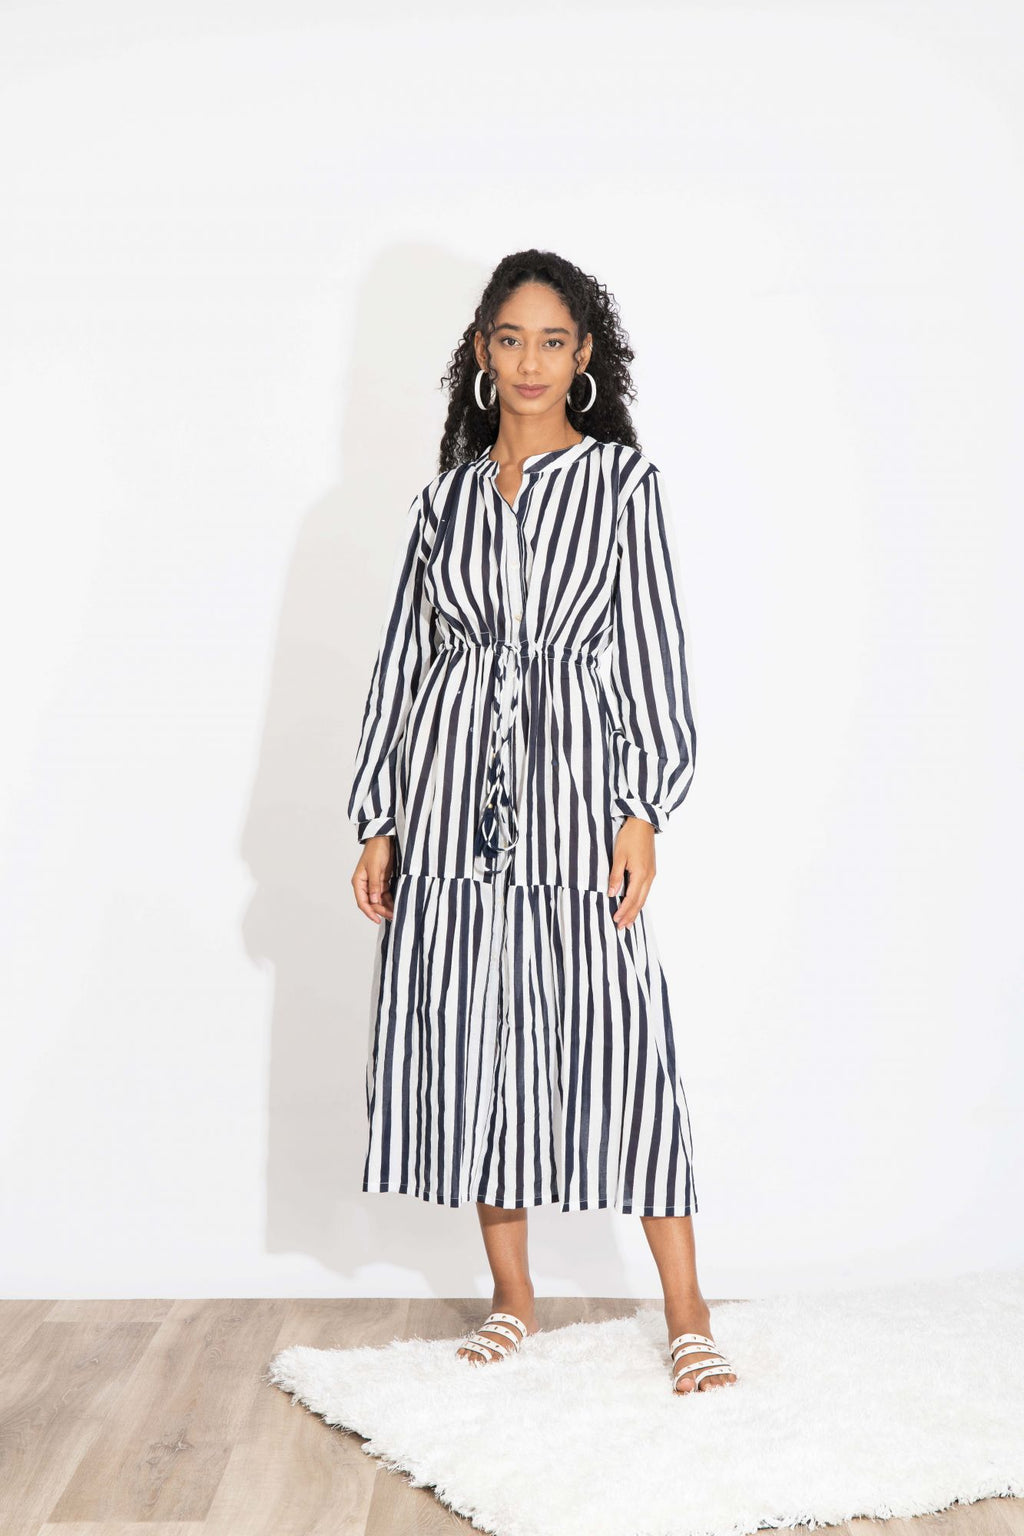 The Beach Company India - Shop for Womens beachwear online - Tuscany Dress for Navy Stripes for ladies - Holiday poolside wear for women